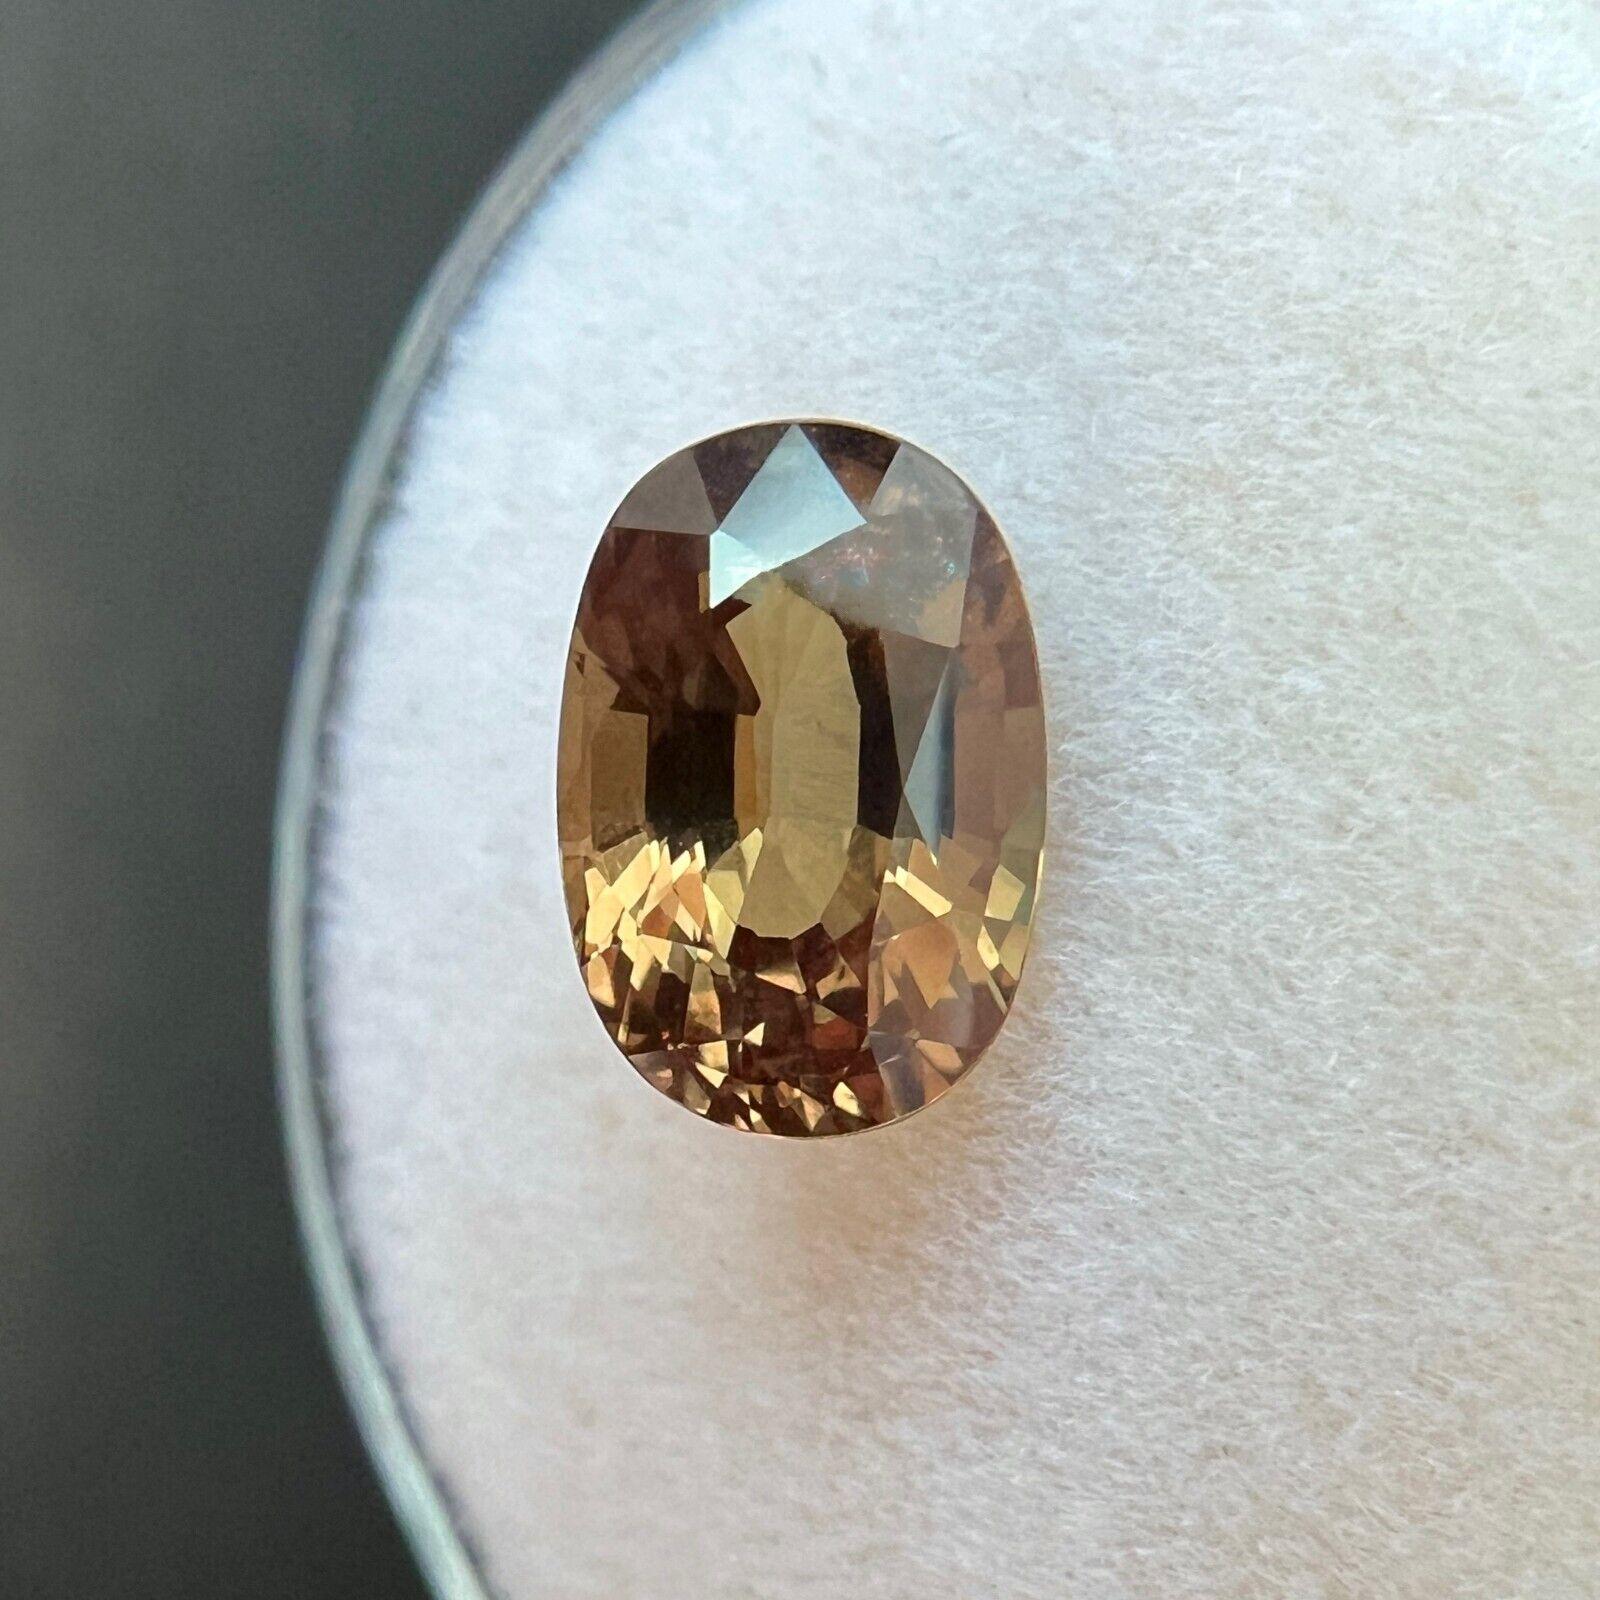 Oval Cut 2.15ct Natural Colour Change Garnet GIA Certified Untreated Pyrope Spessartine For Sale